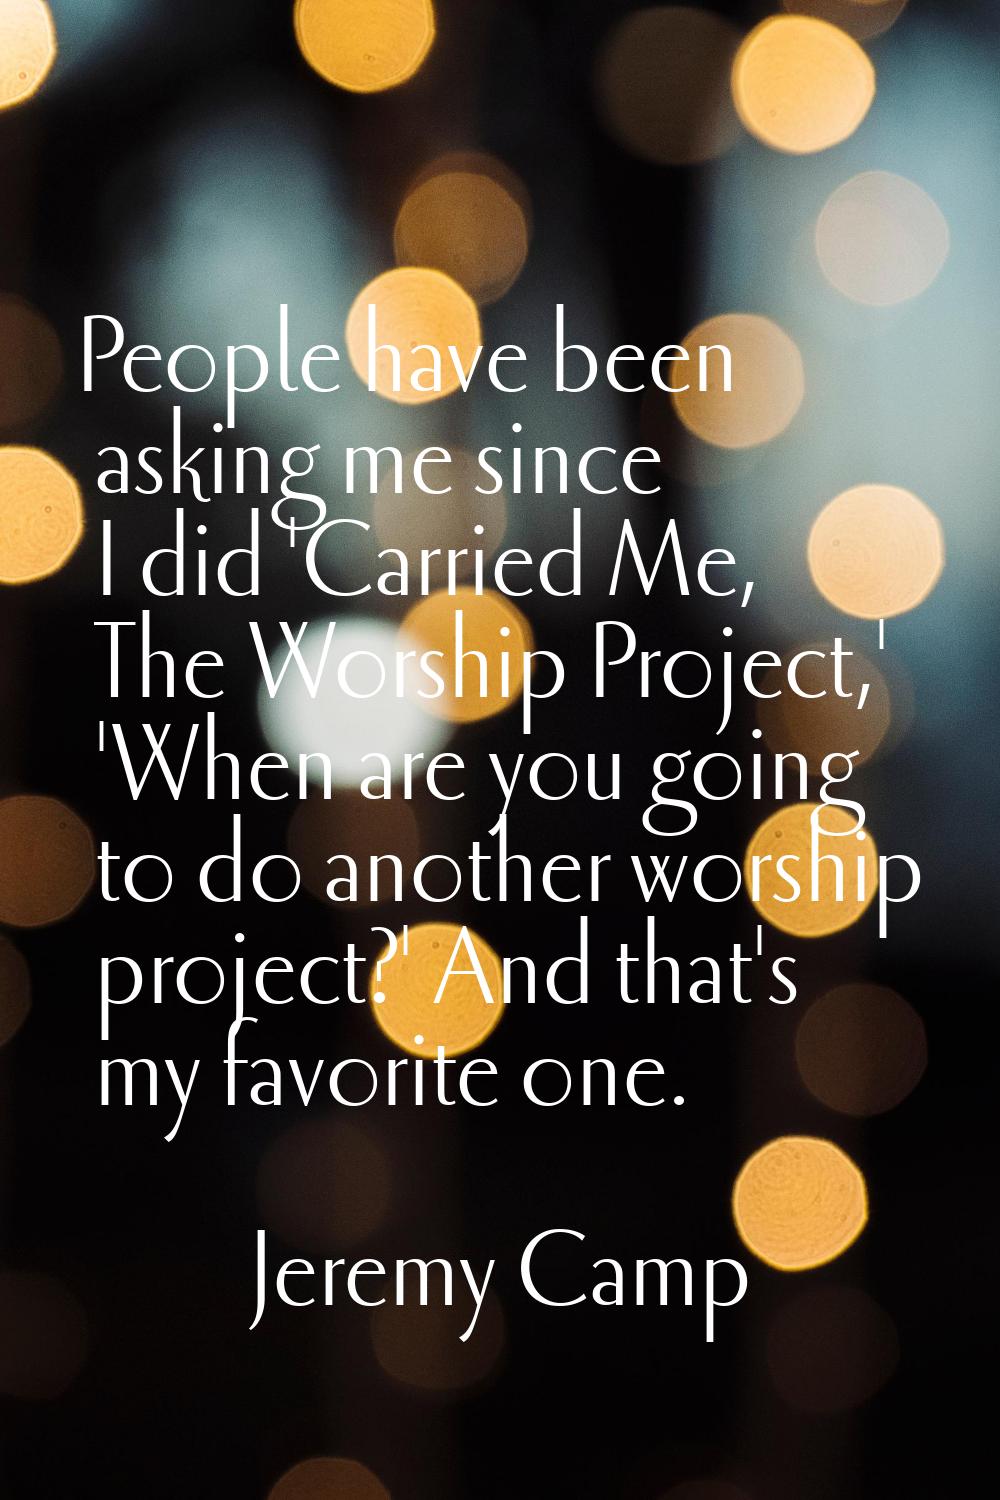 People have been asking me since I did 'Carried Me, The Worship Project,' 'When are you going to do